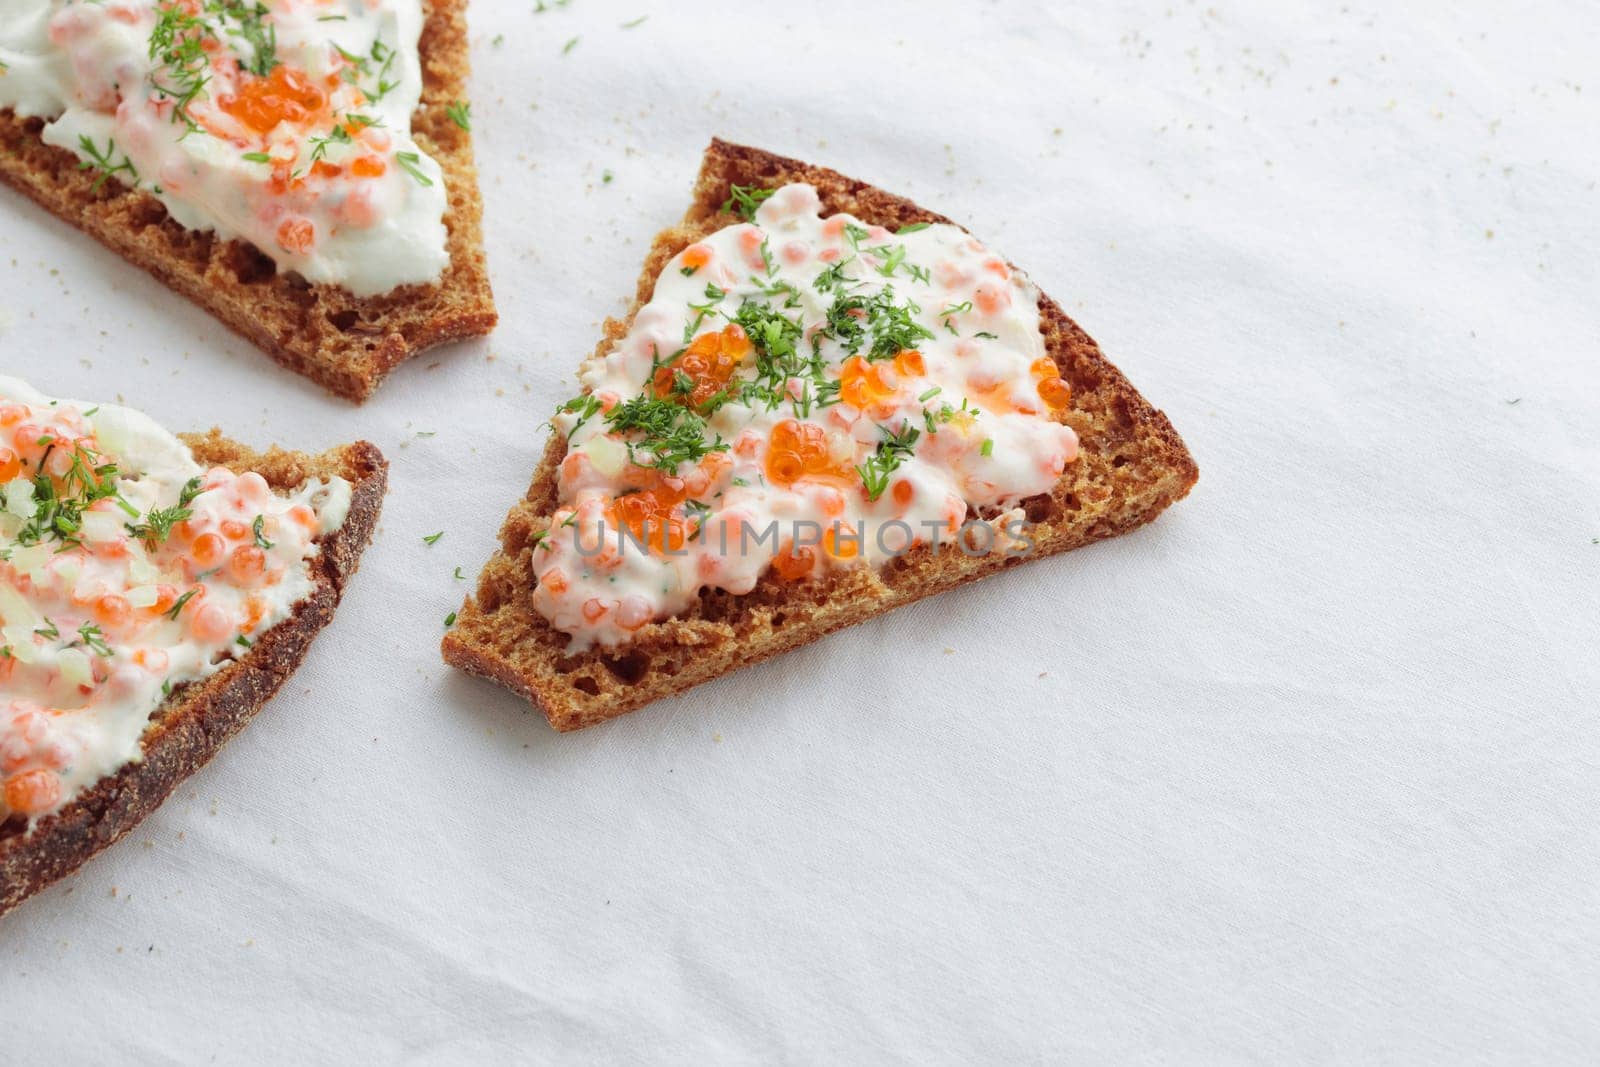 Homemade appetizer with red caviar, sour cream, dill, onion and rye bread on the white table - the traditional finnish recipe for a holiday food, in minimalistic style, healthy eating concept, horizontal